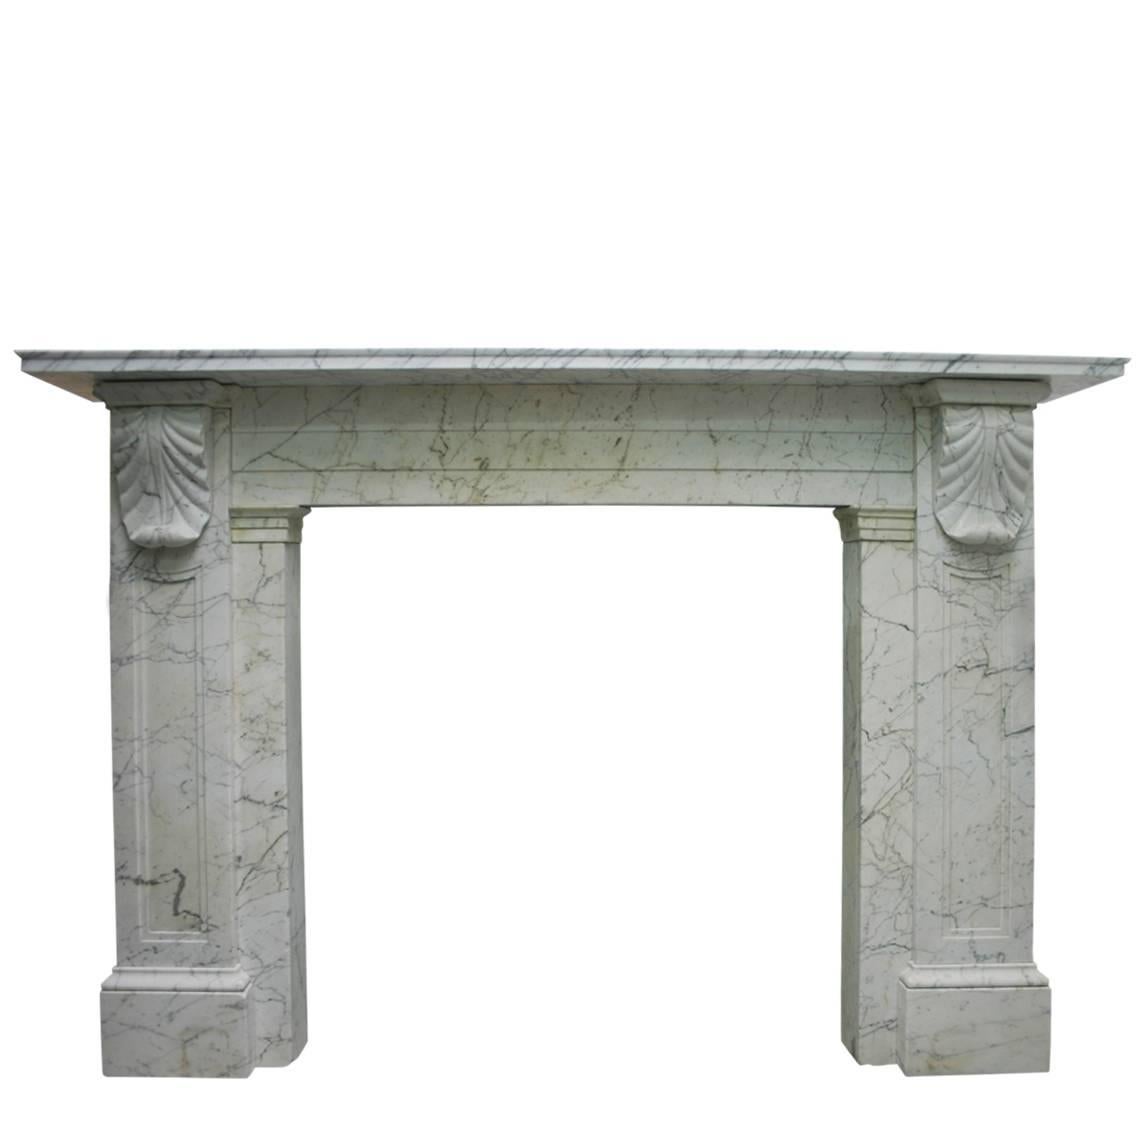 Early 19th Century Regency Carrara Marble Fireplace Surround